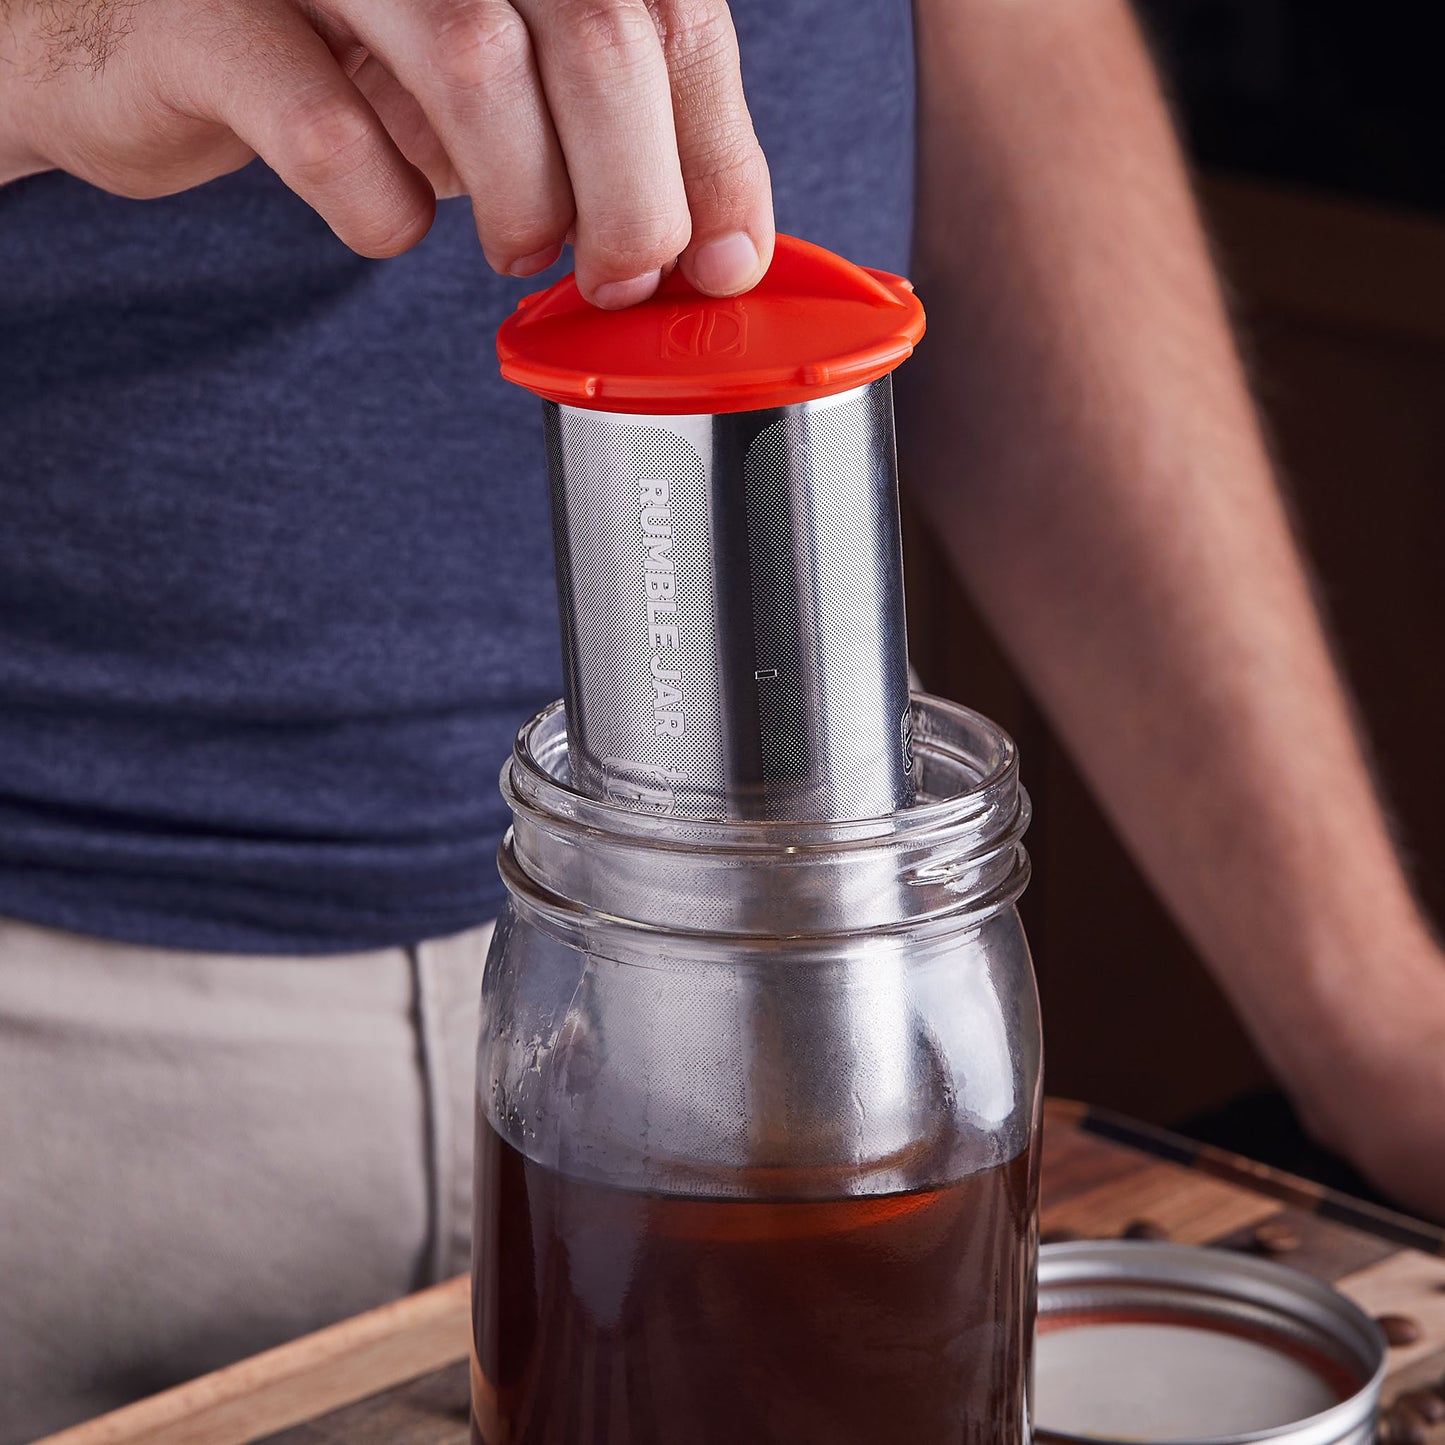 Rumble Jar's cold brew coffee filter fits entirely inside the Mason jar